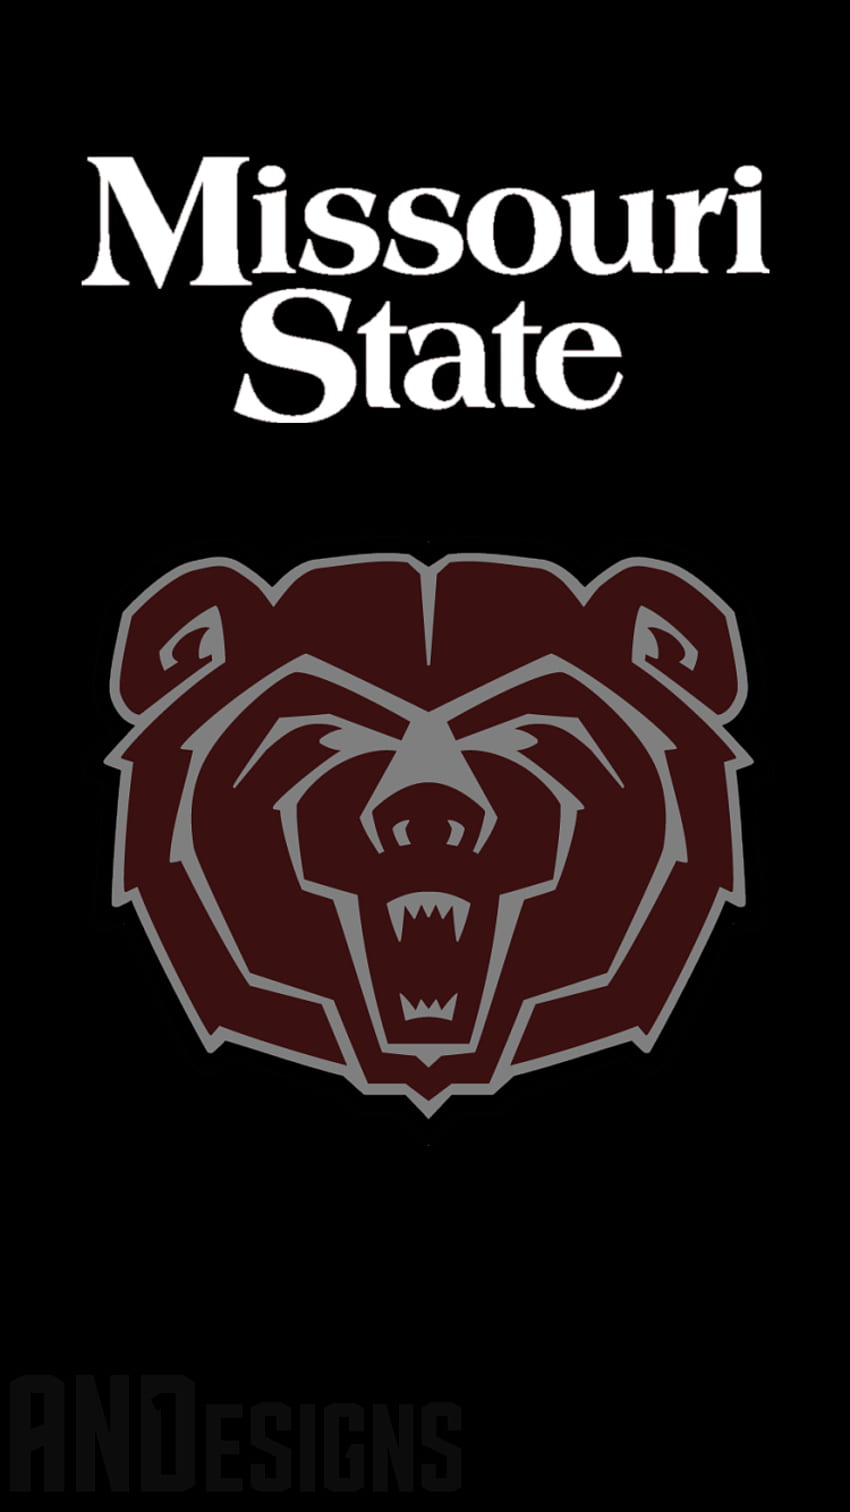 NCAA IPhone 6 6s By And1 Designs. Missouri State HD phone wallpaper